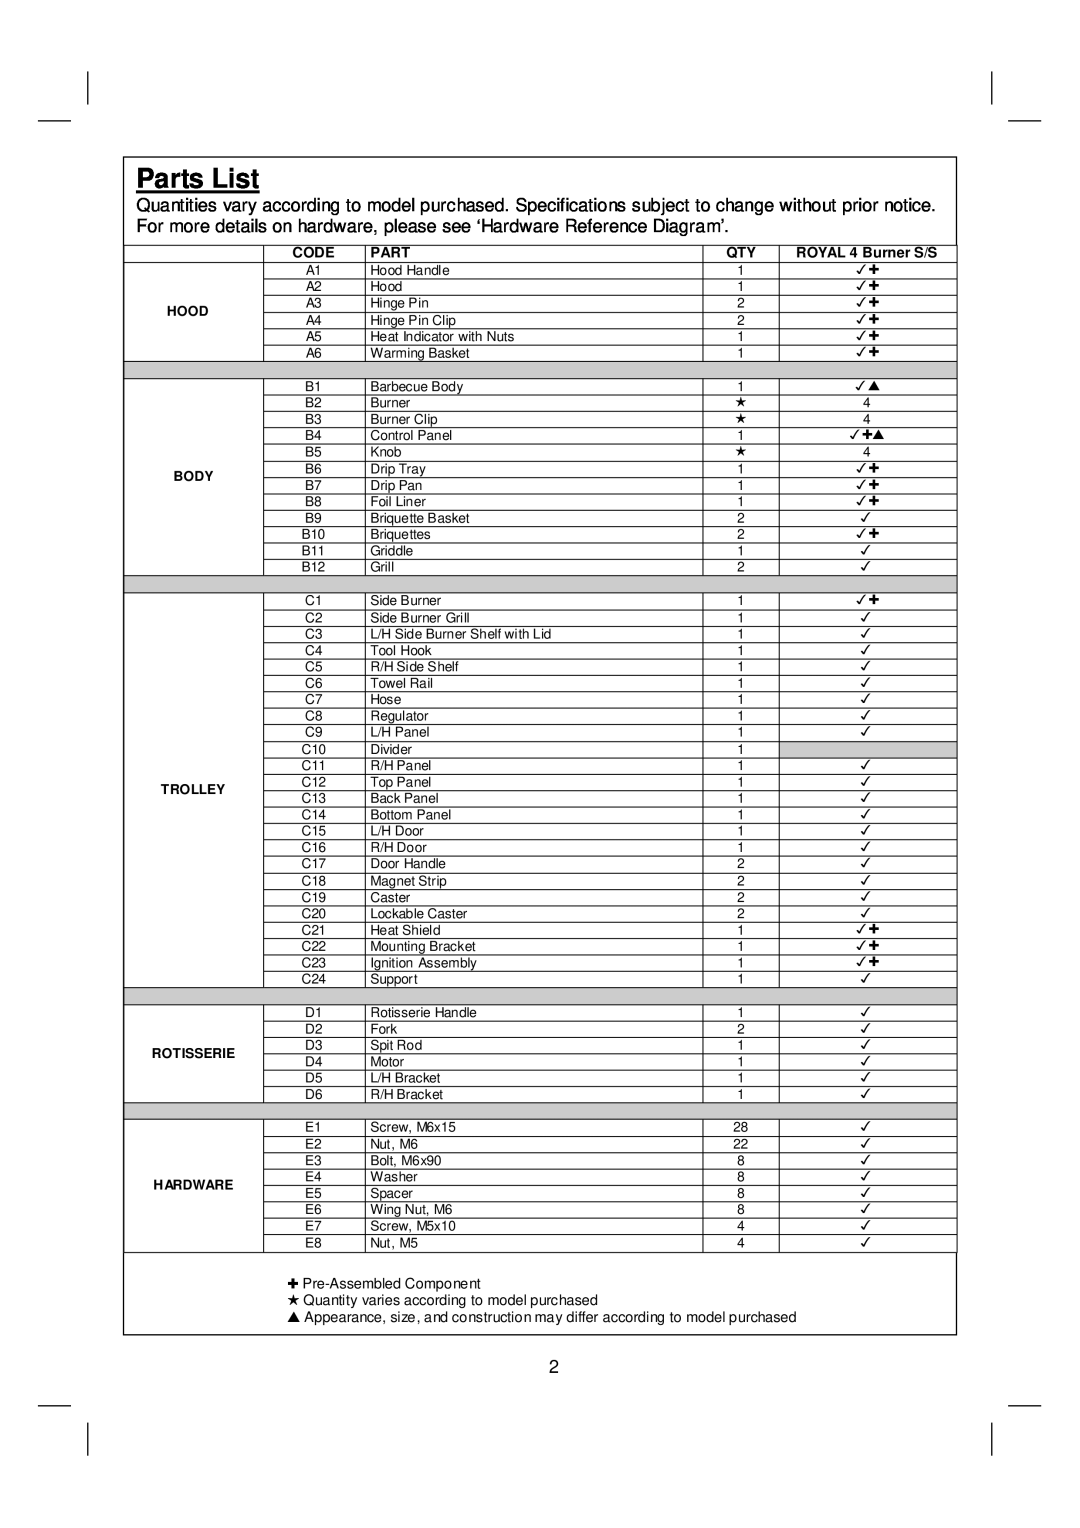 Royal Leisure 359 warranty Parts List, Pre-AssembledComponent, Quantity varies according to model purchased 